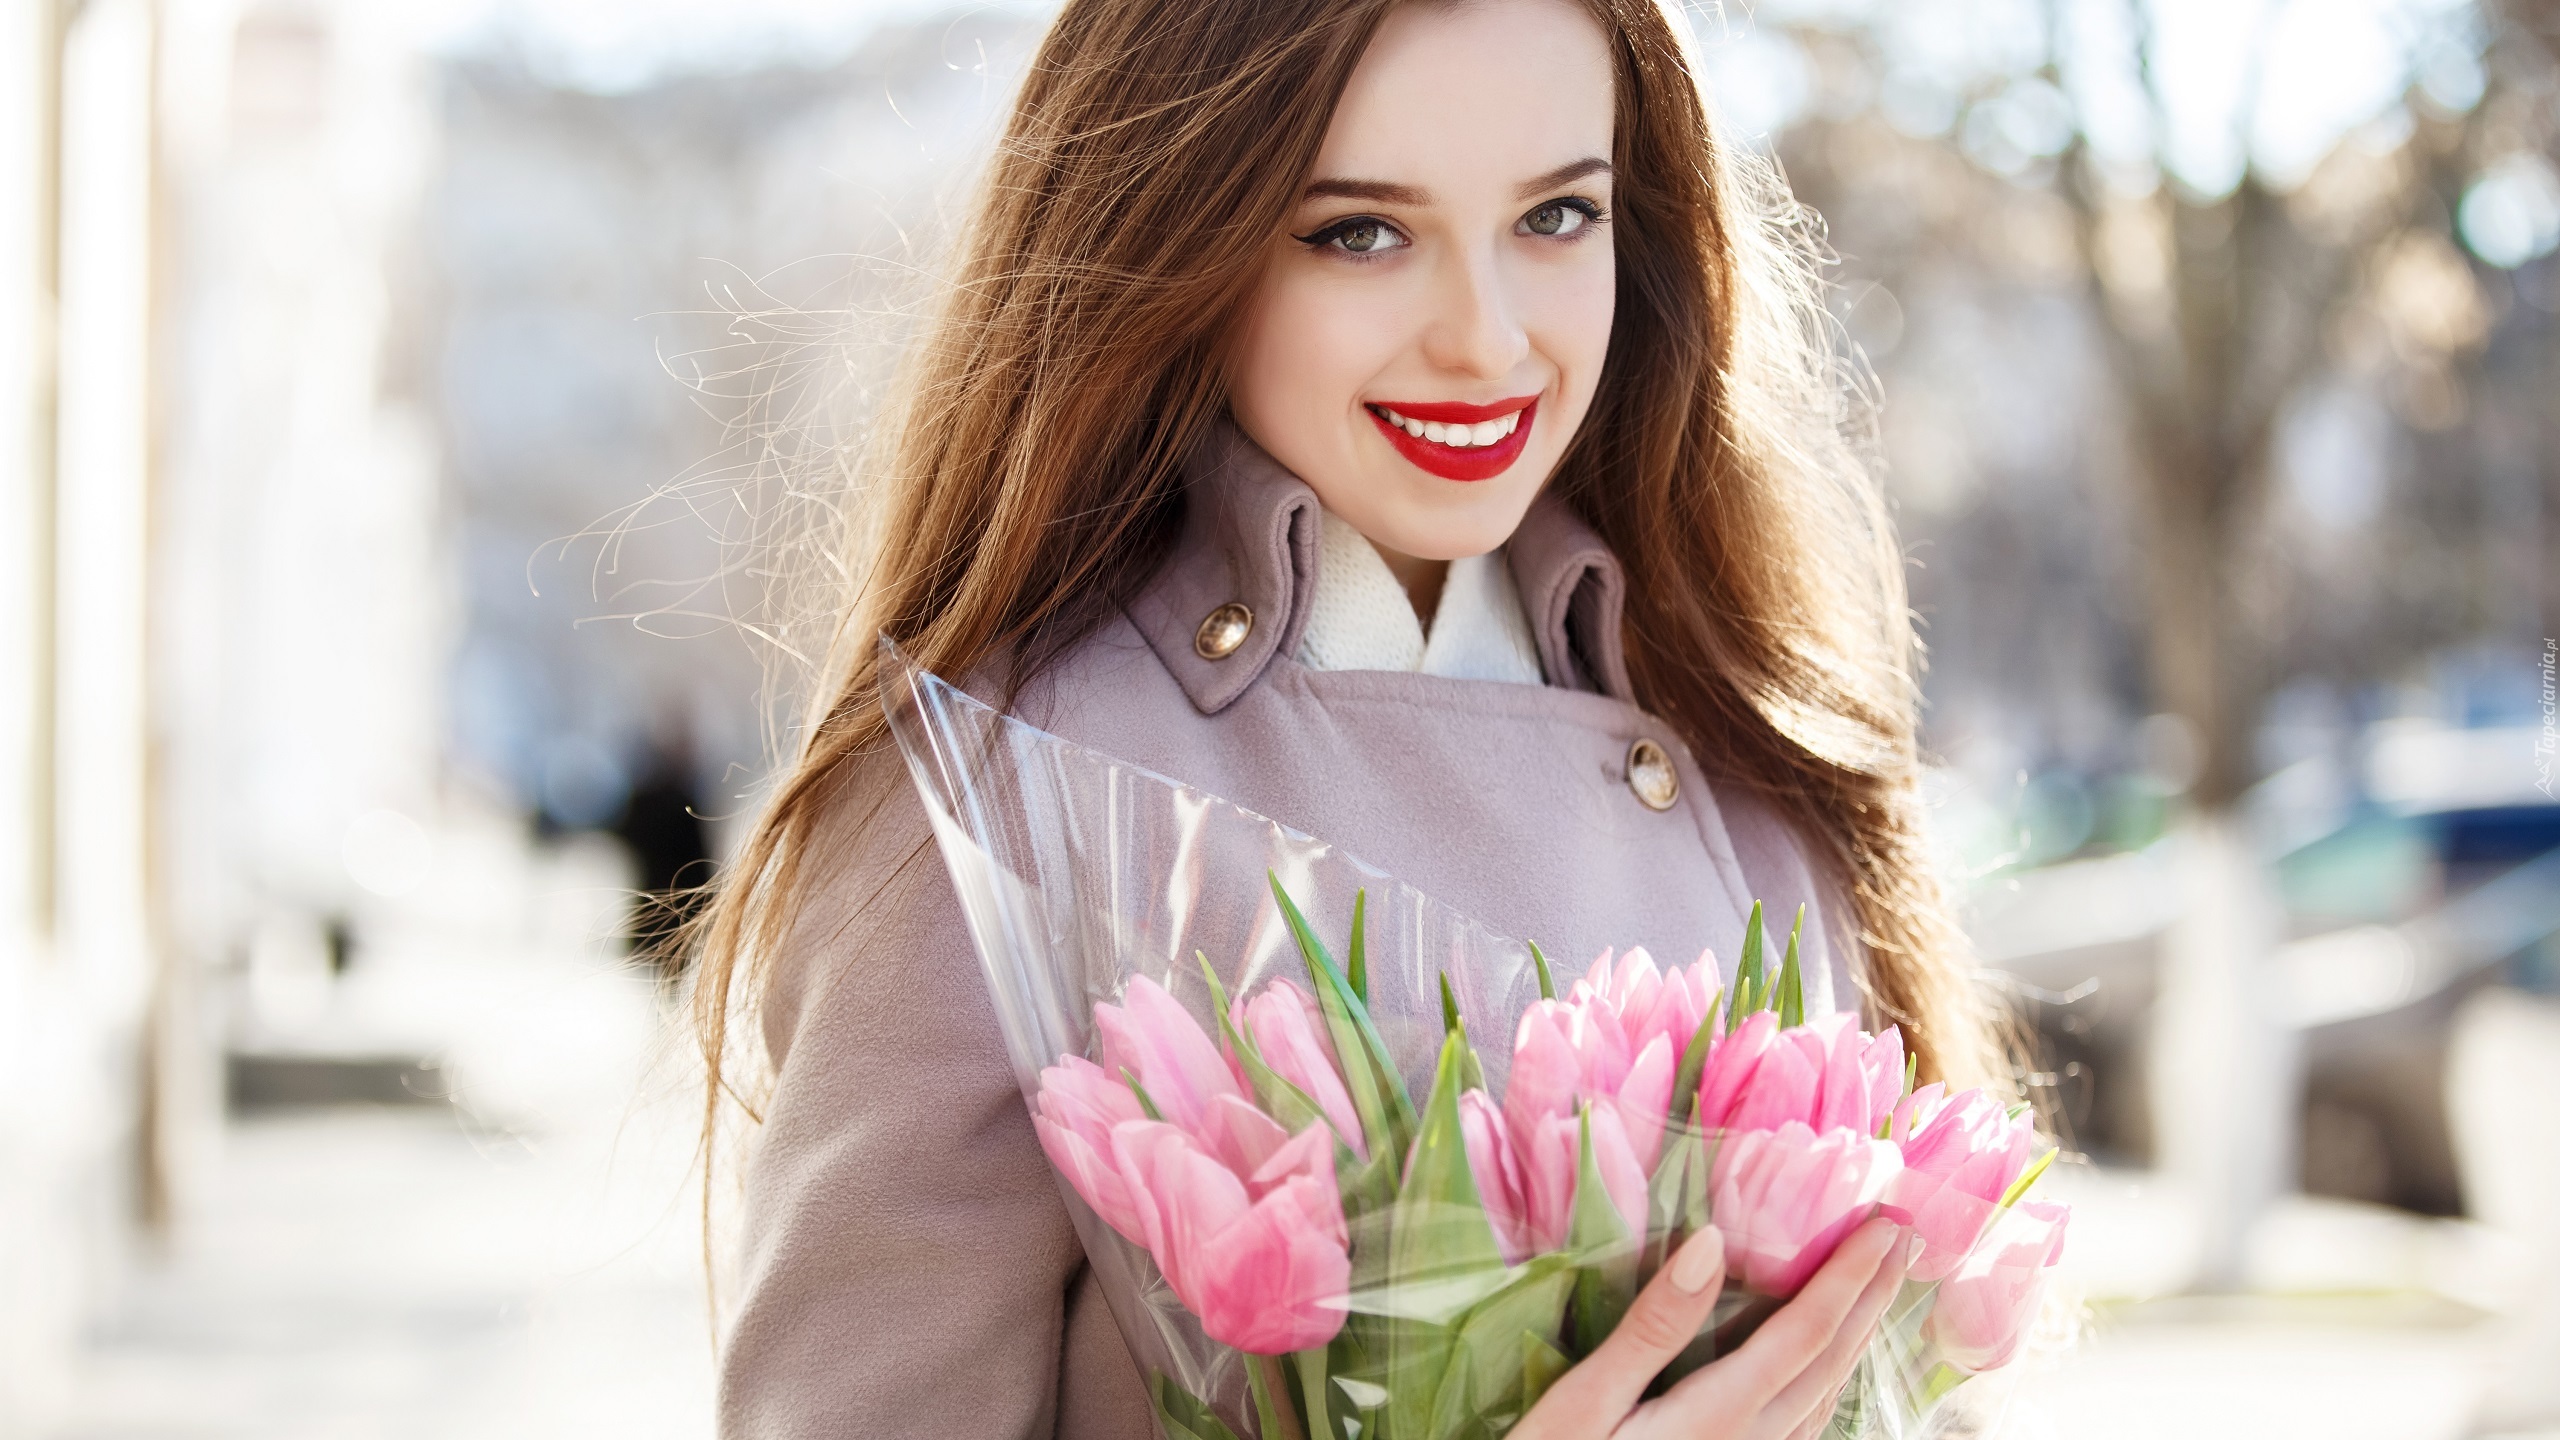 Coats Model Women Outdoors Brunette Smiling Grey Coat Long Hair Open Mouth Flowers Looking At Viewer 2560x1440